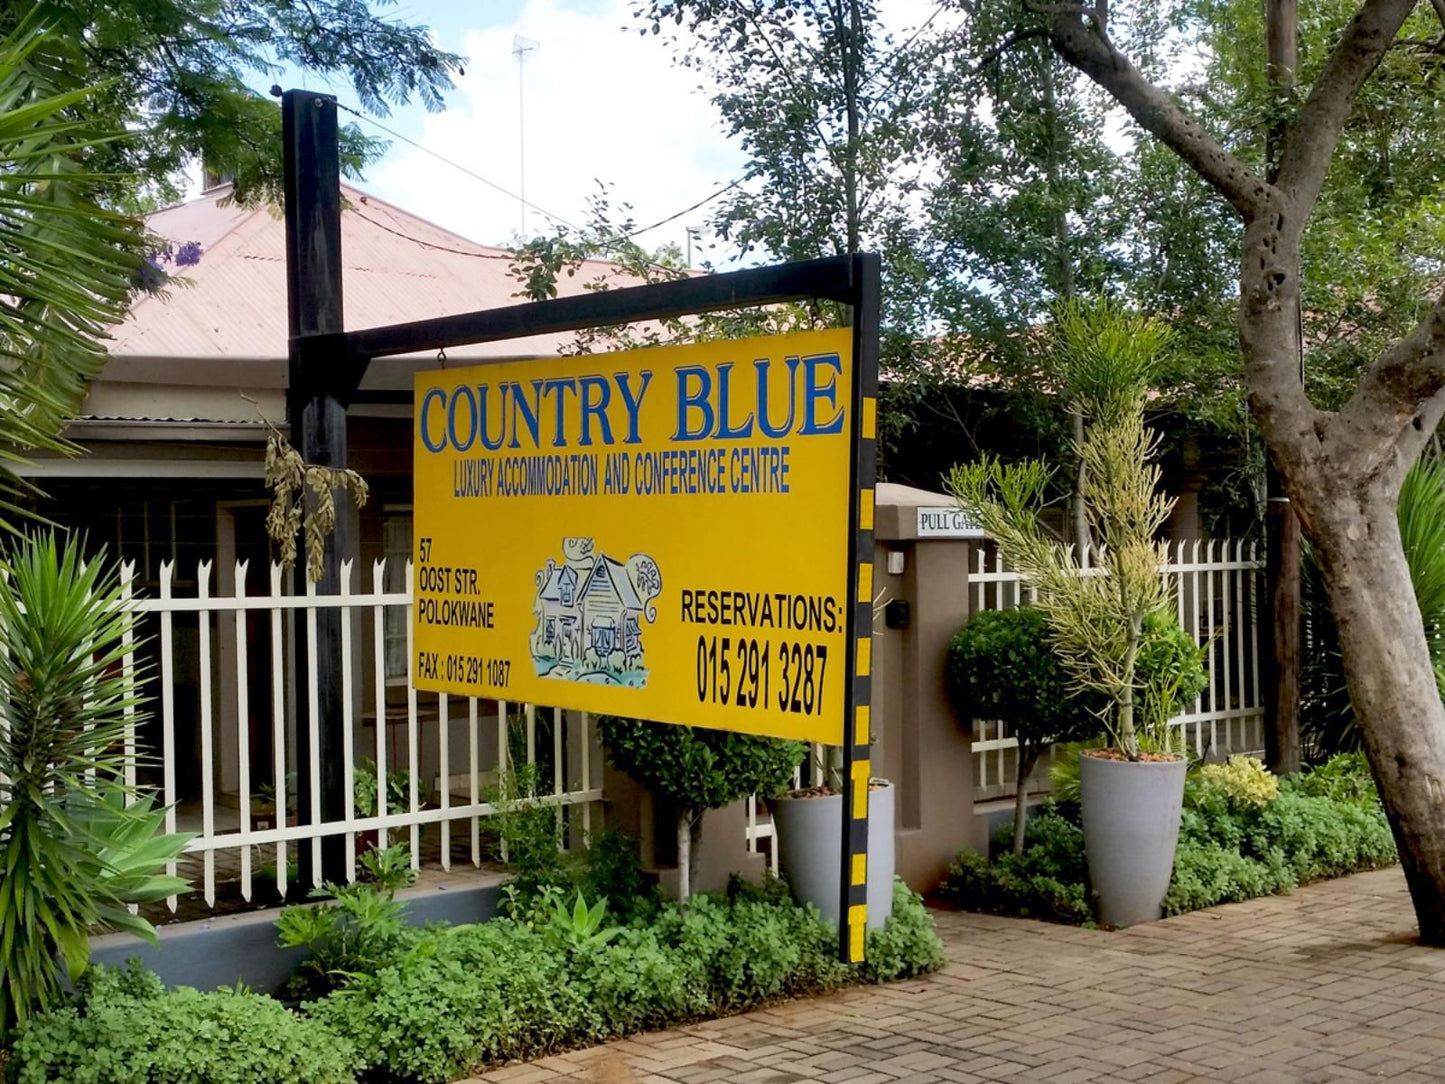 Country Blue Luxury Guest House Polokwane Ext 4 Polokwane Pietersburg Limpopo Province South Africa Sign